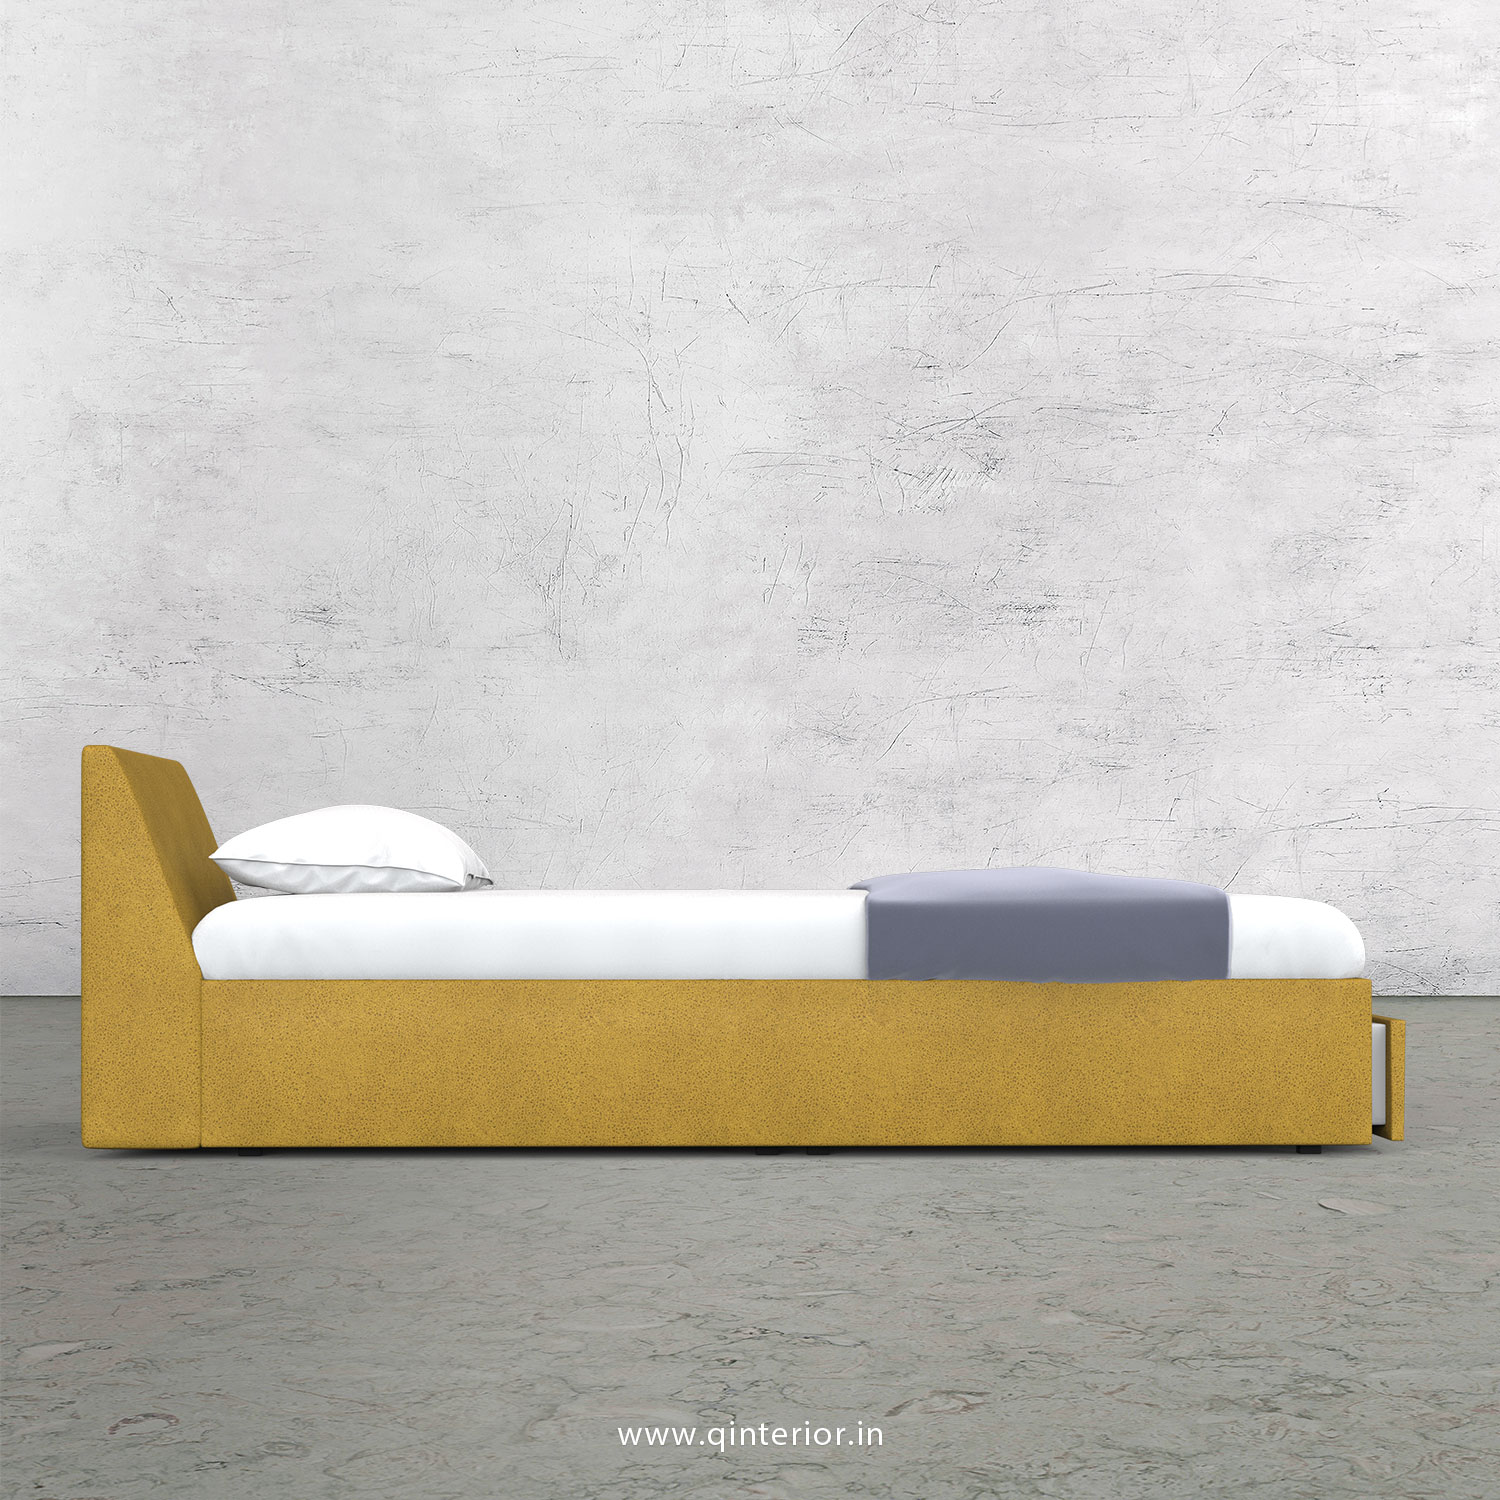 Viva Single Storage Bed in Fab Leather Fabric - SBD001 FL18